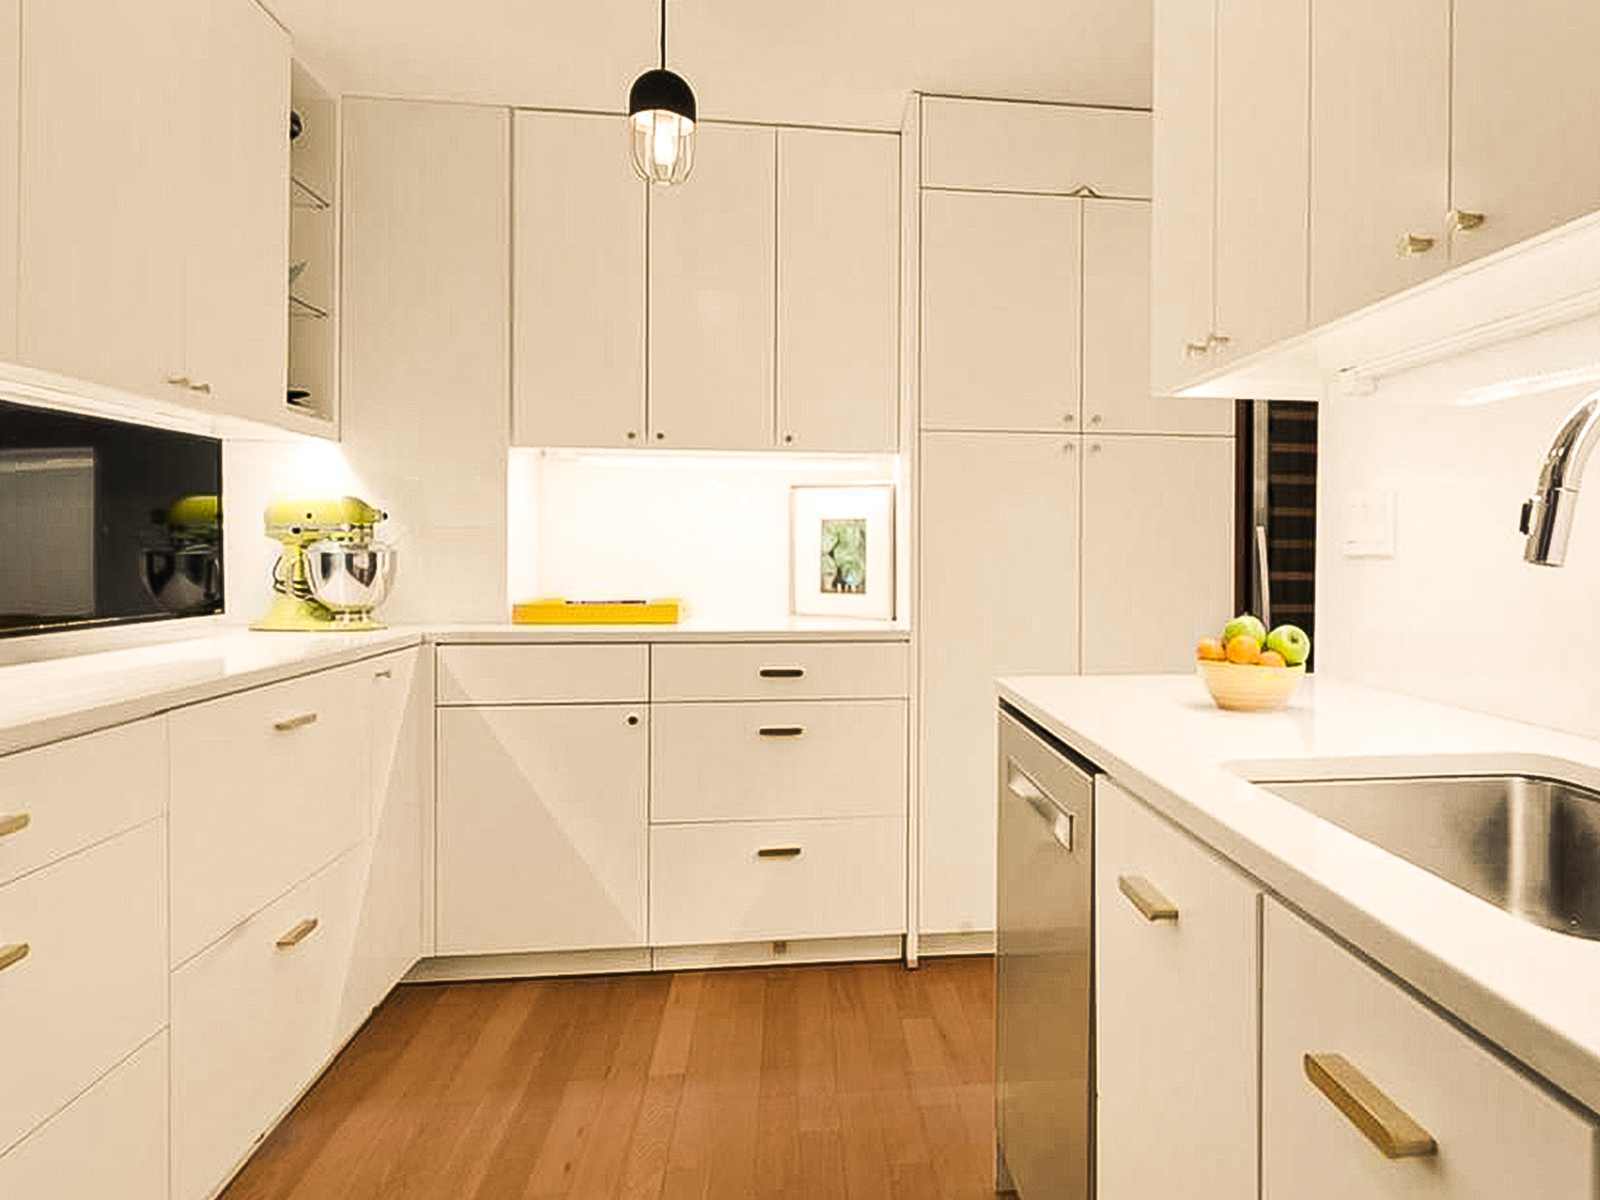 White cabinets with brightly-lit white countertops and warm wood floors